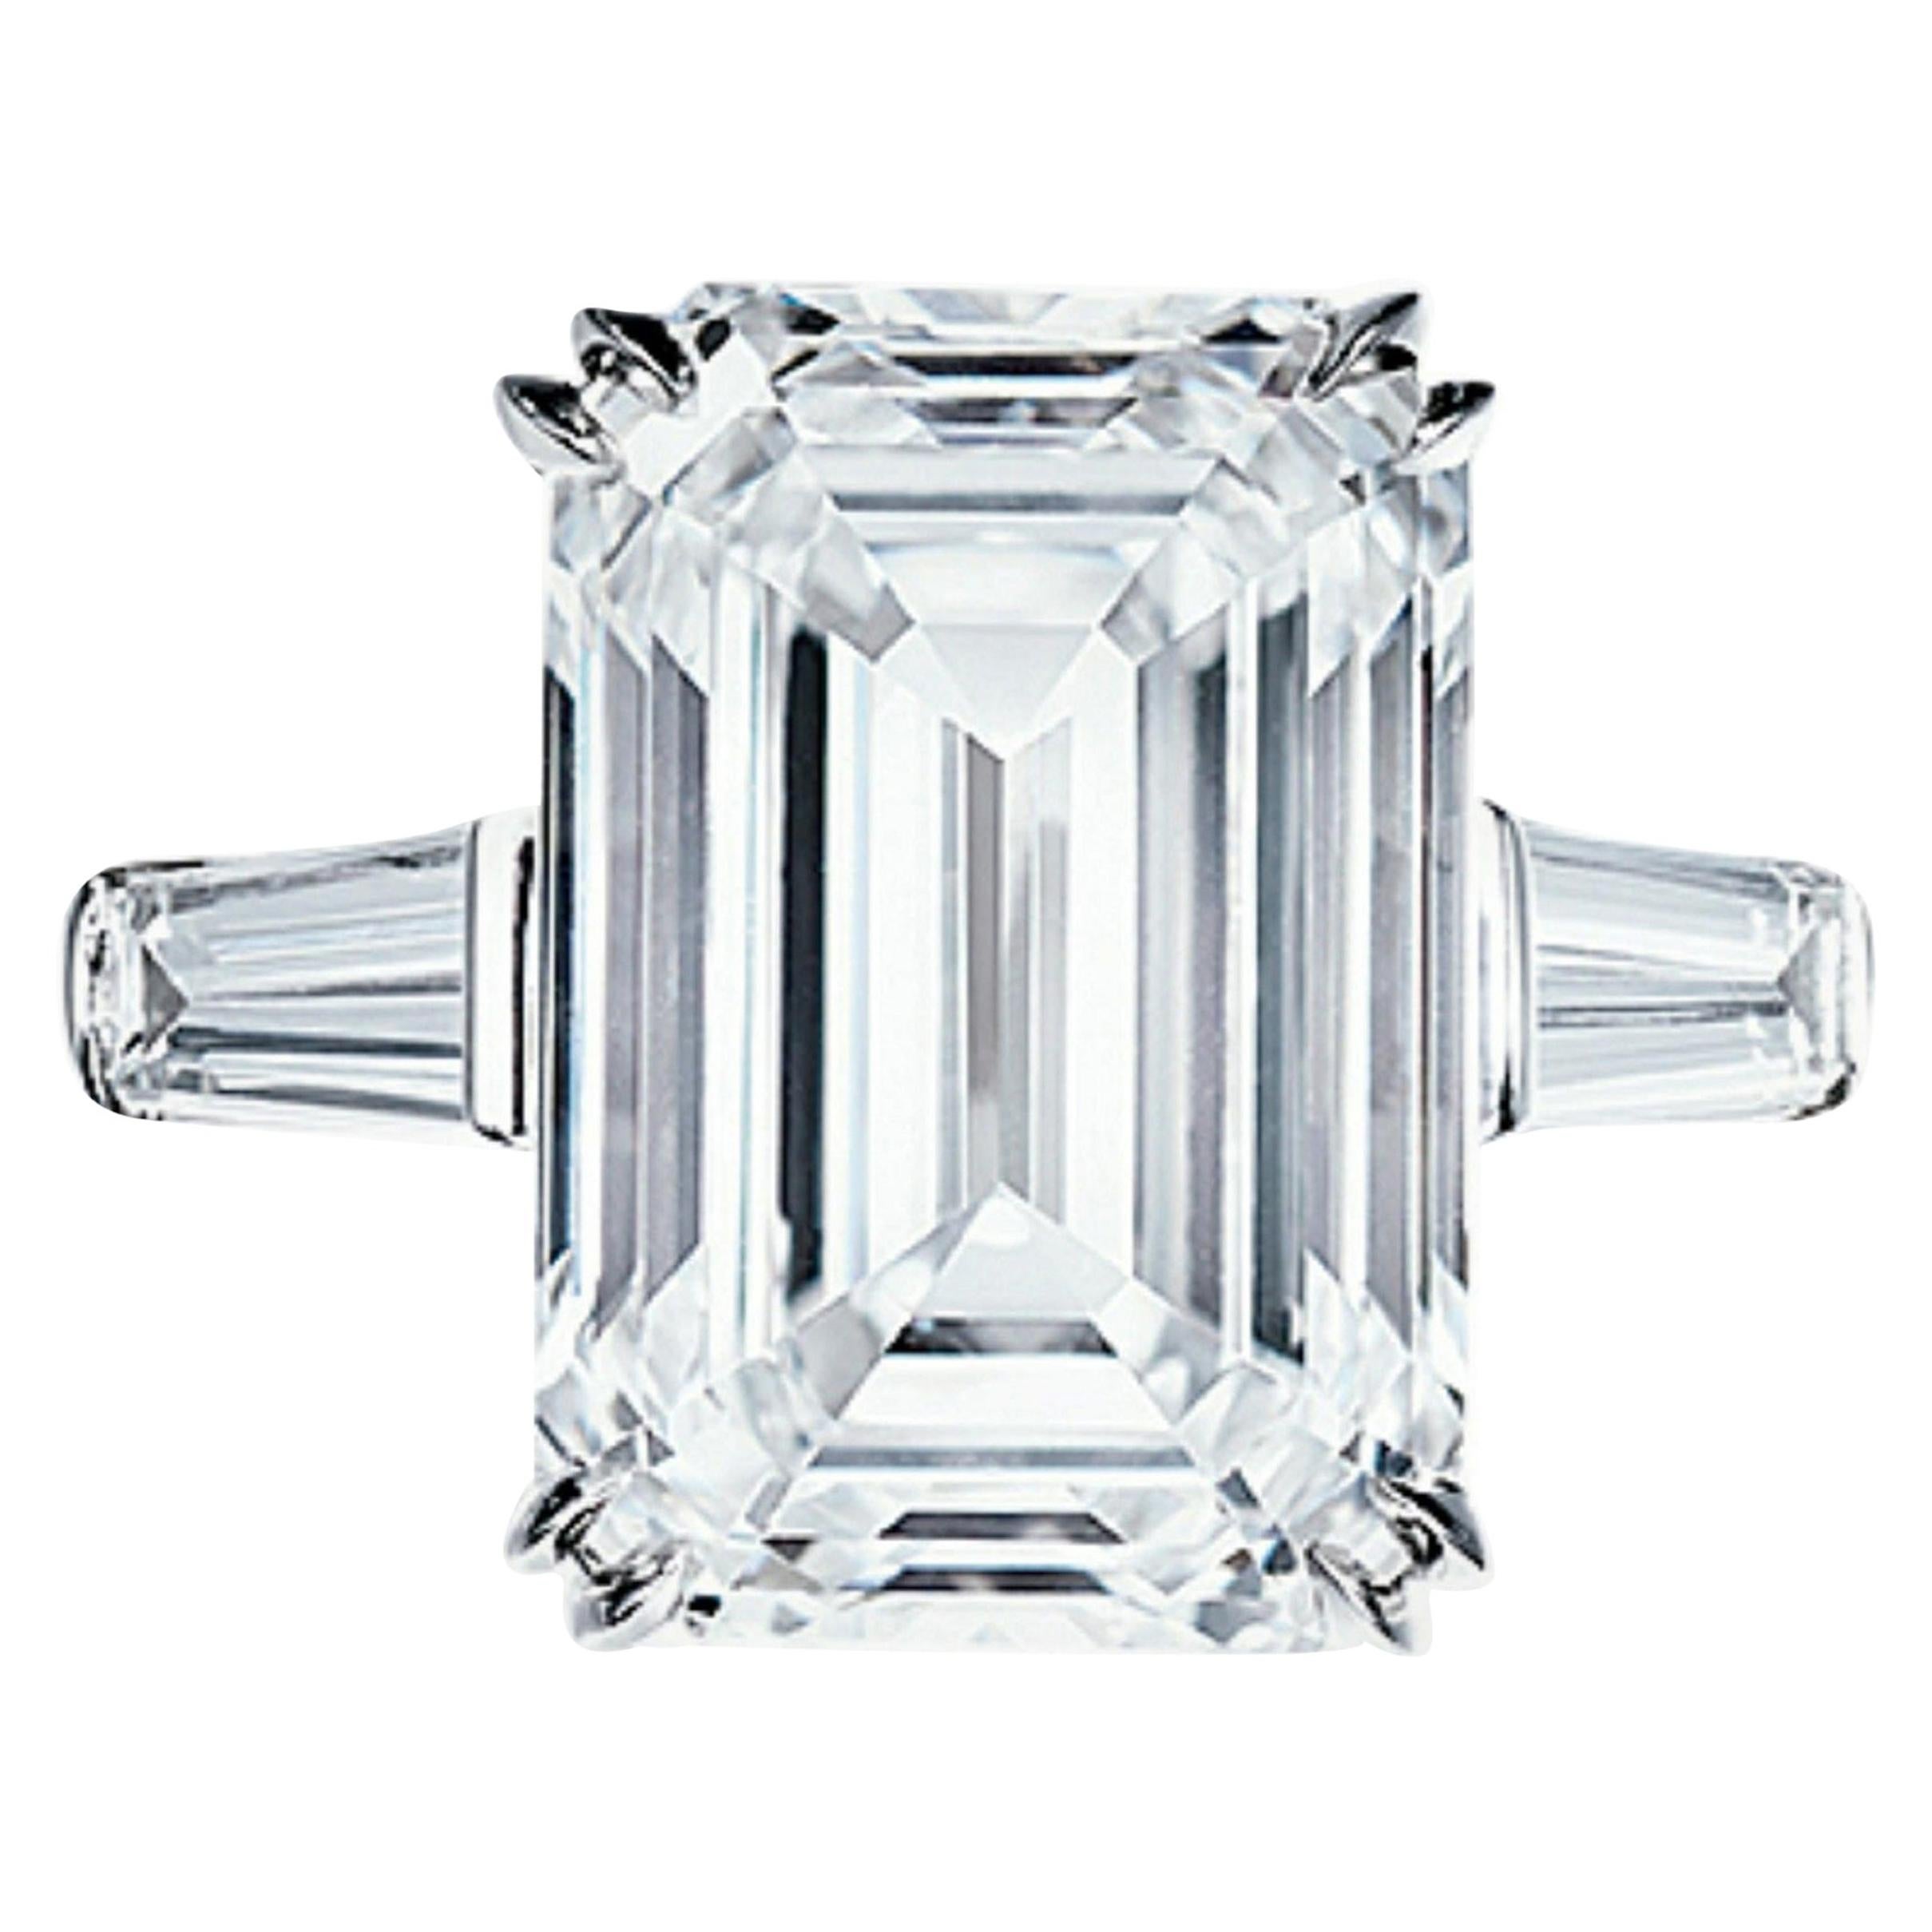 An exquisite investment grade emerald cut diamond ring with perfect proportions FLAWLESS clarity and D color 

This ring has been handmade in Italy